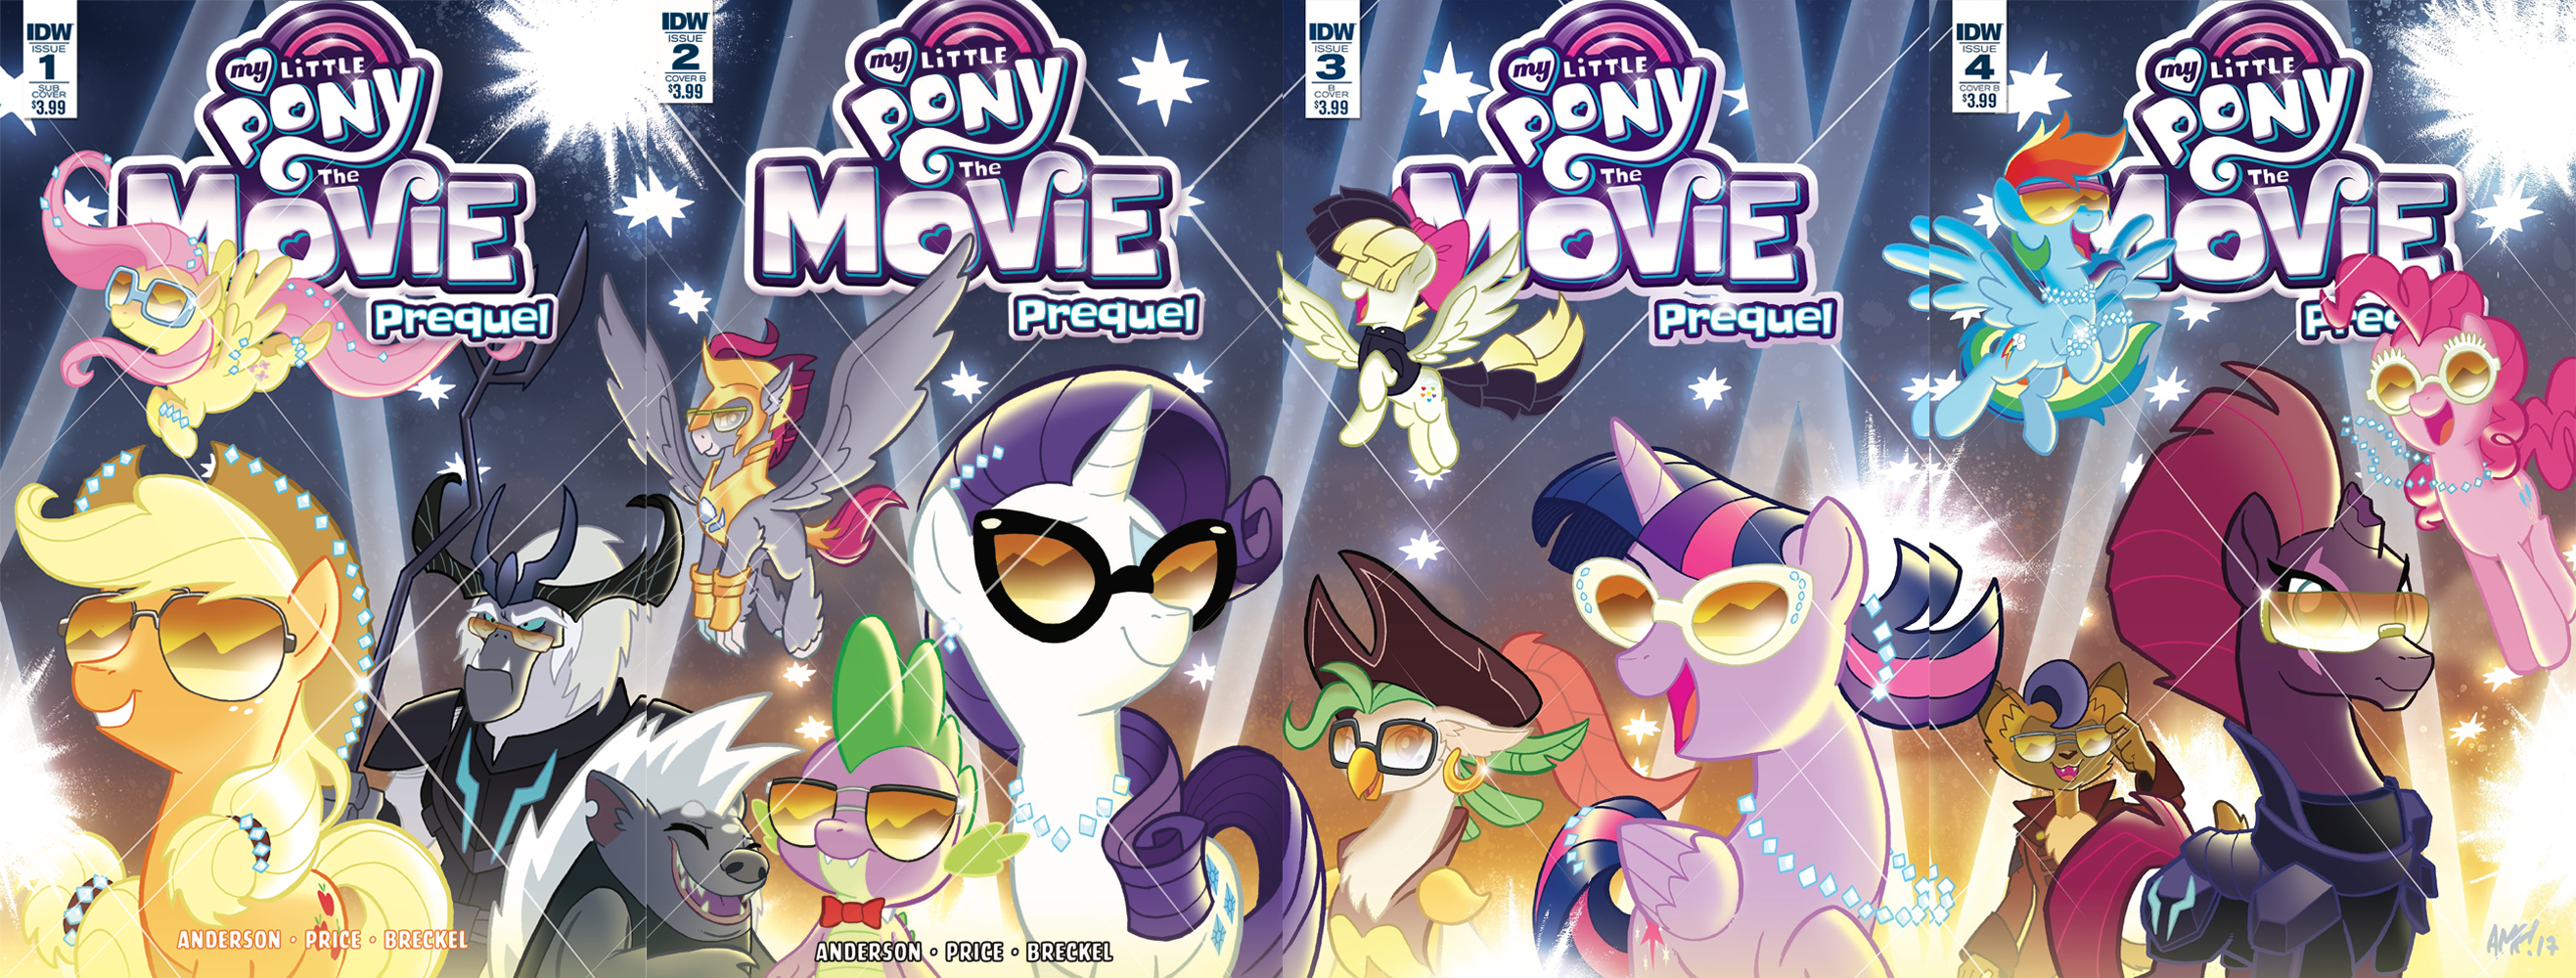 My Little Pony: The Movie Prequel Picture